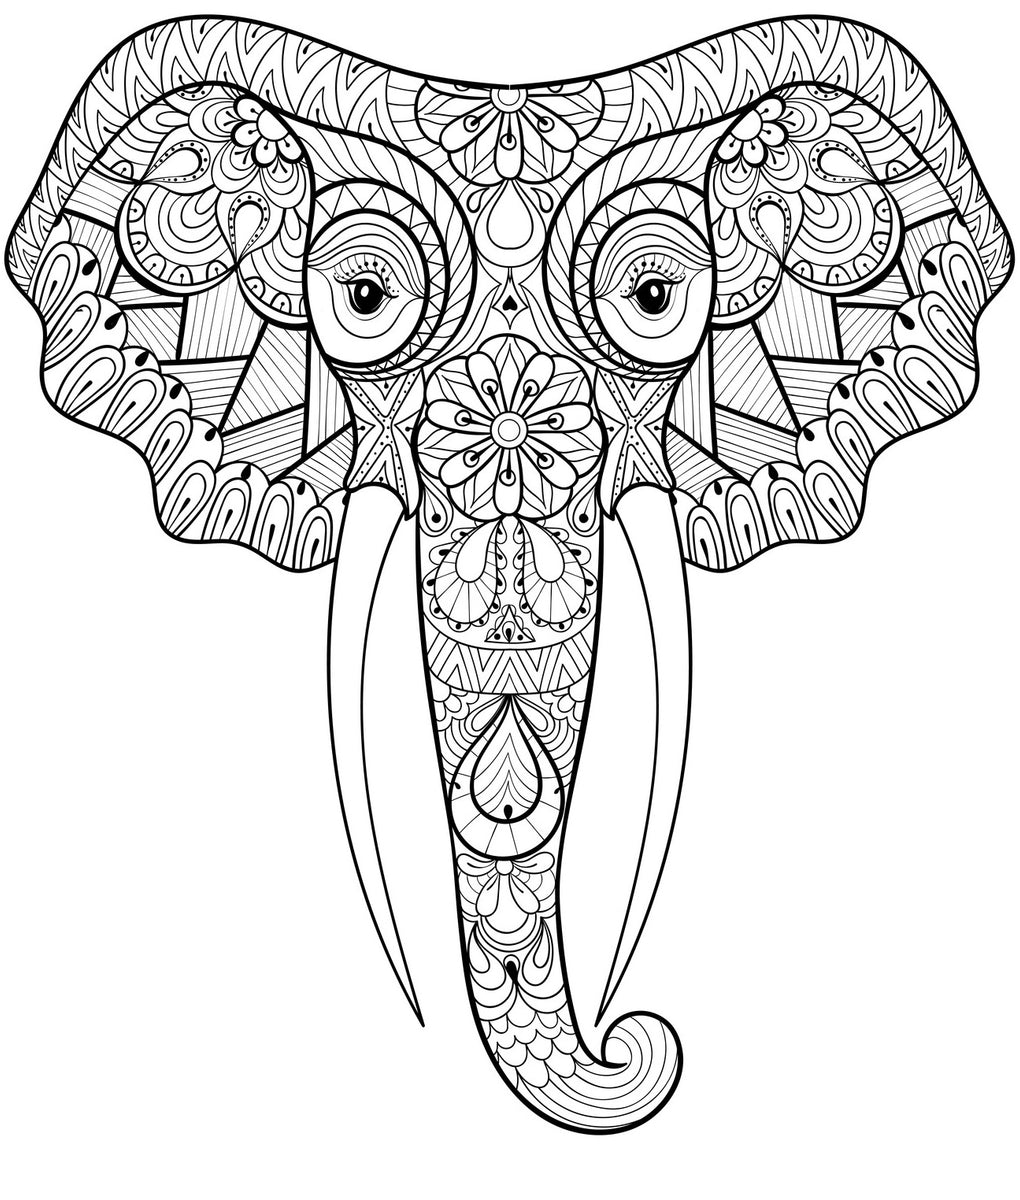 Elephants, PDF Coloring Book - The Largest African Animals in Relaxing ...